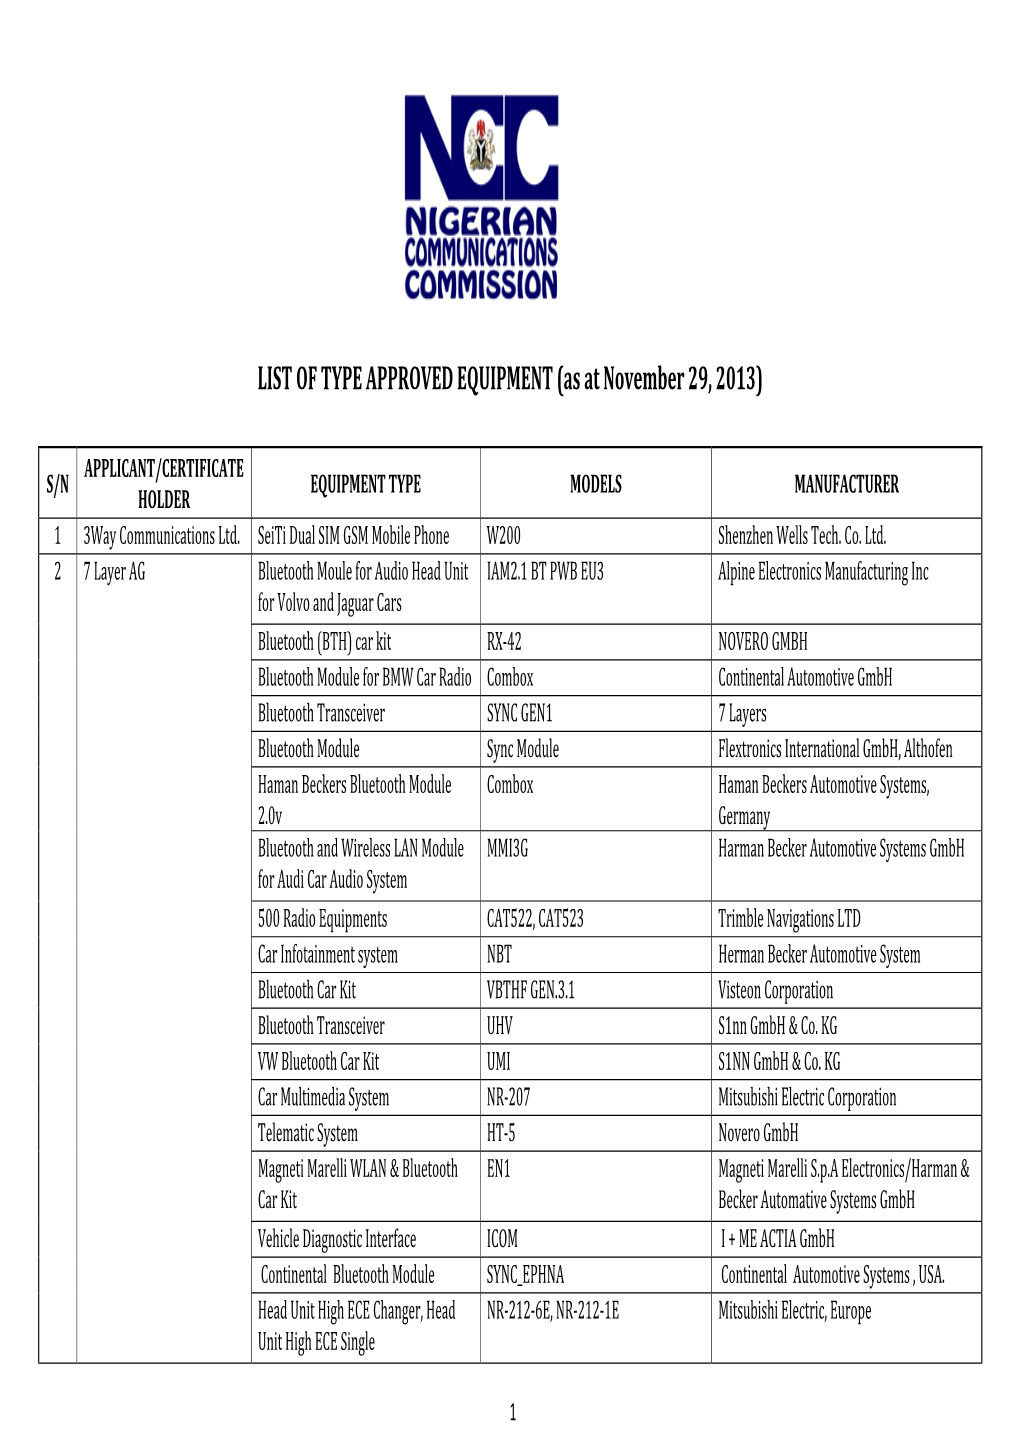 LIST of TYPE APPROVED EQUIPMENT (As at November 29, 2013)